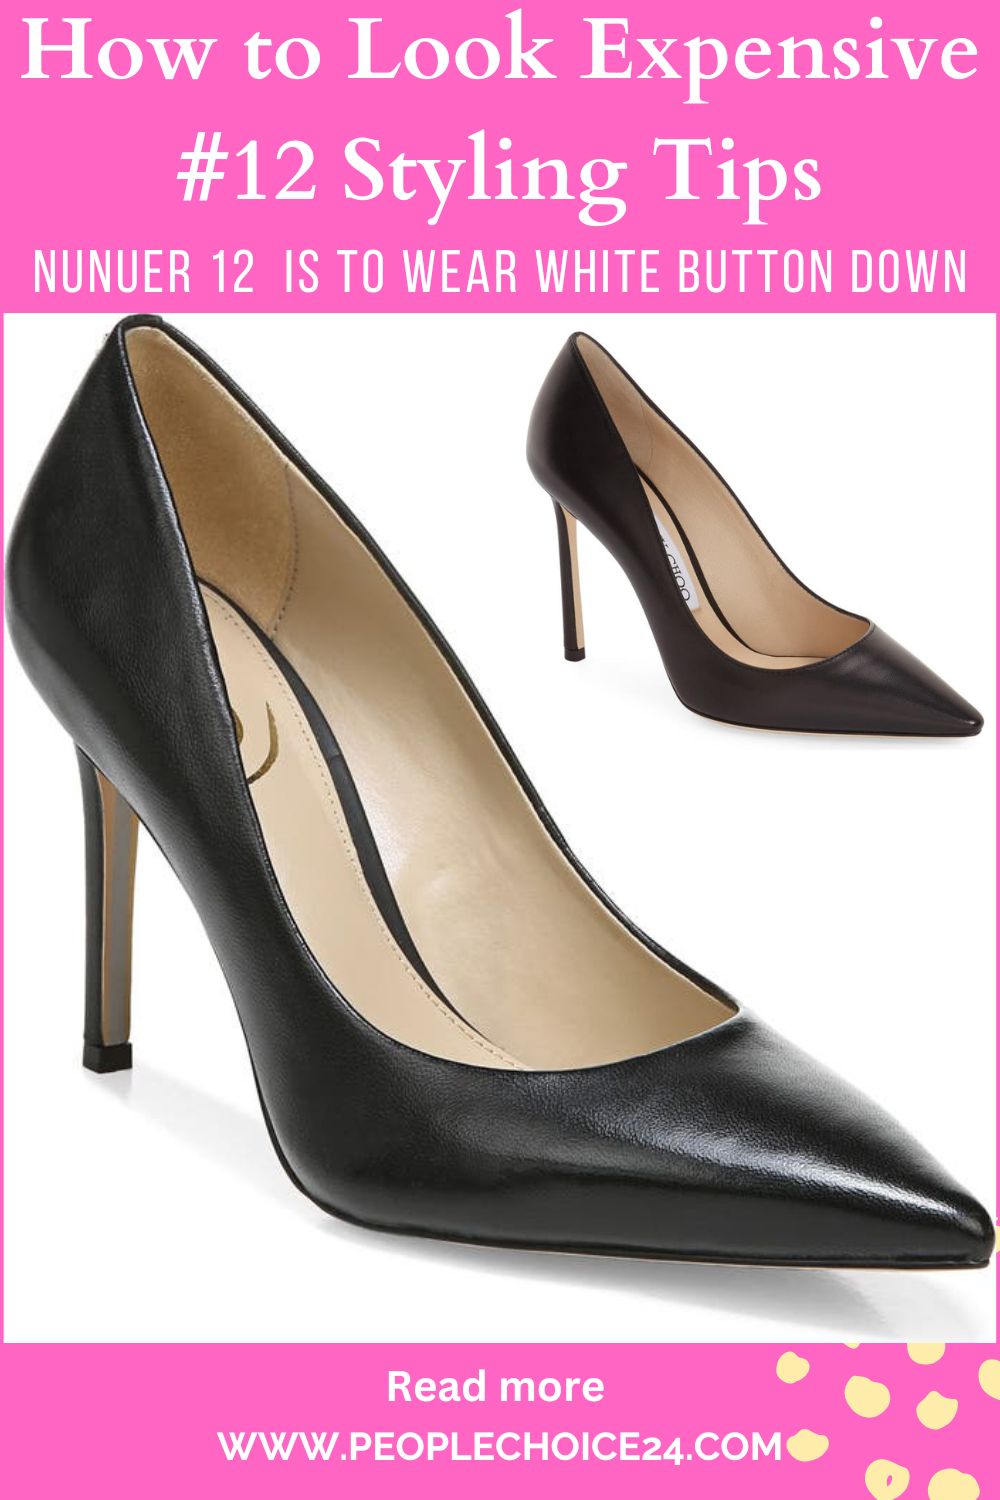 Pointed Toe pumps